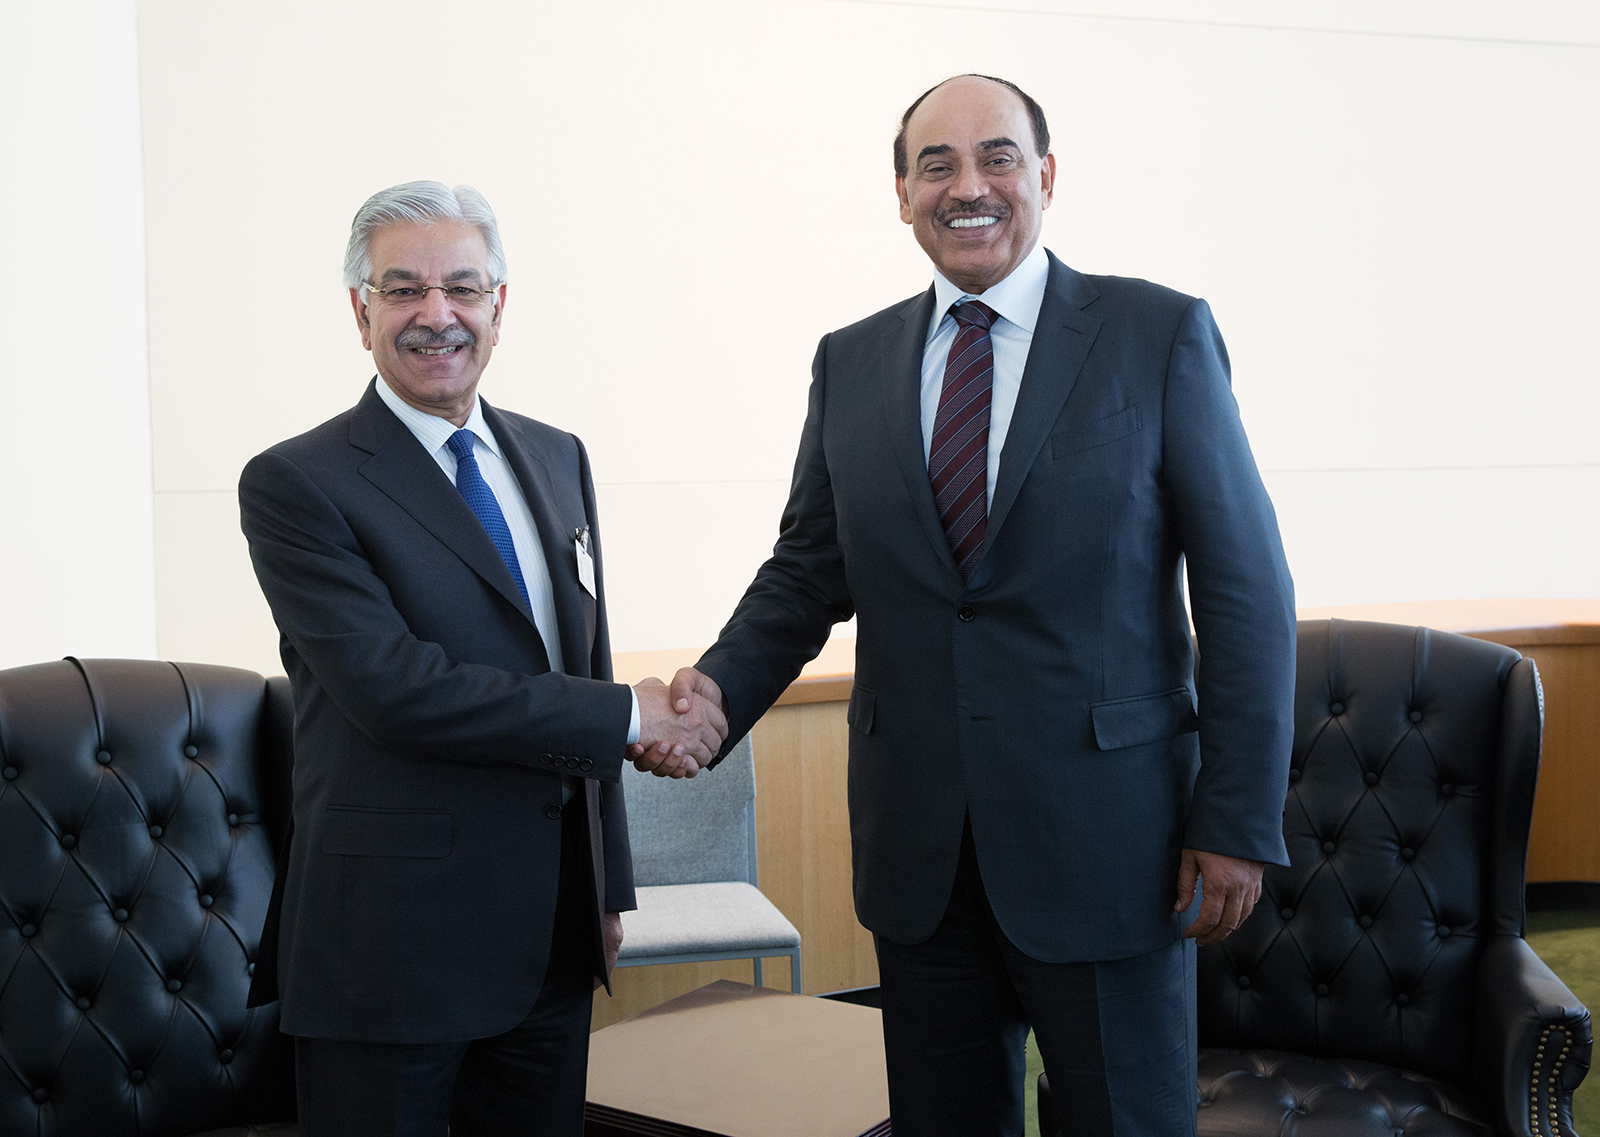 First Deputy Premier and Foreign Minister Sheikh Sabah Al-Khaled Al-Hamad Al-Sabah meets Pakistan's Foreign Minister Khawaja Mohammad Asif